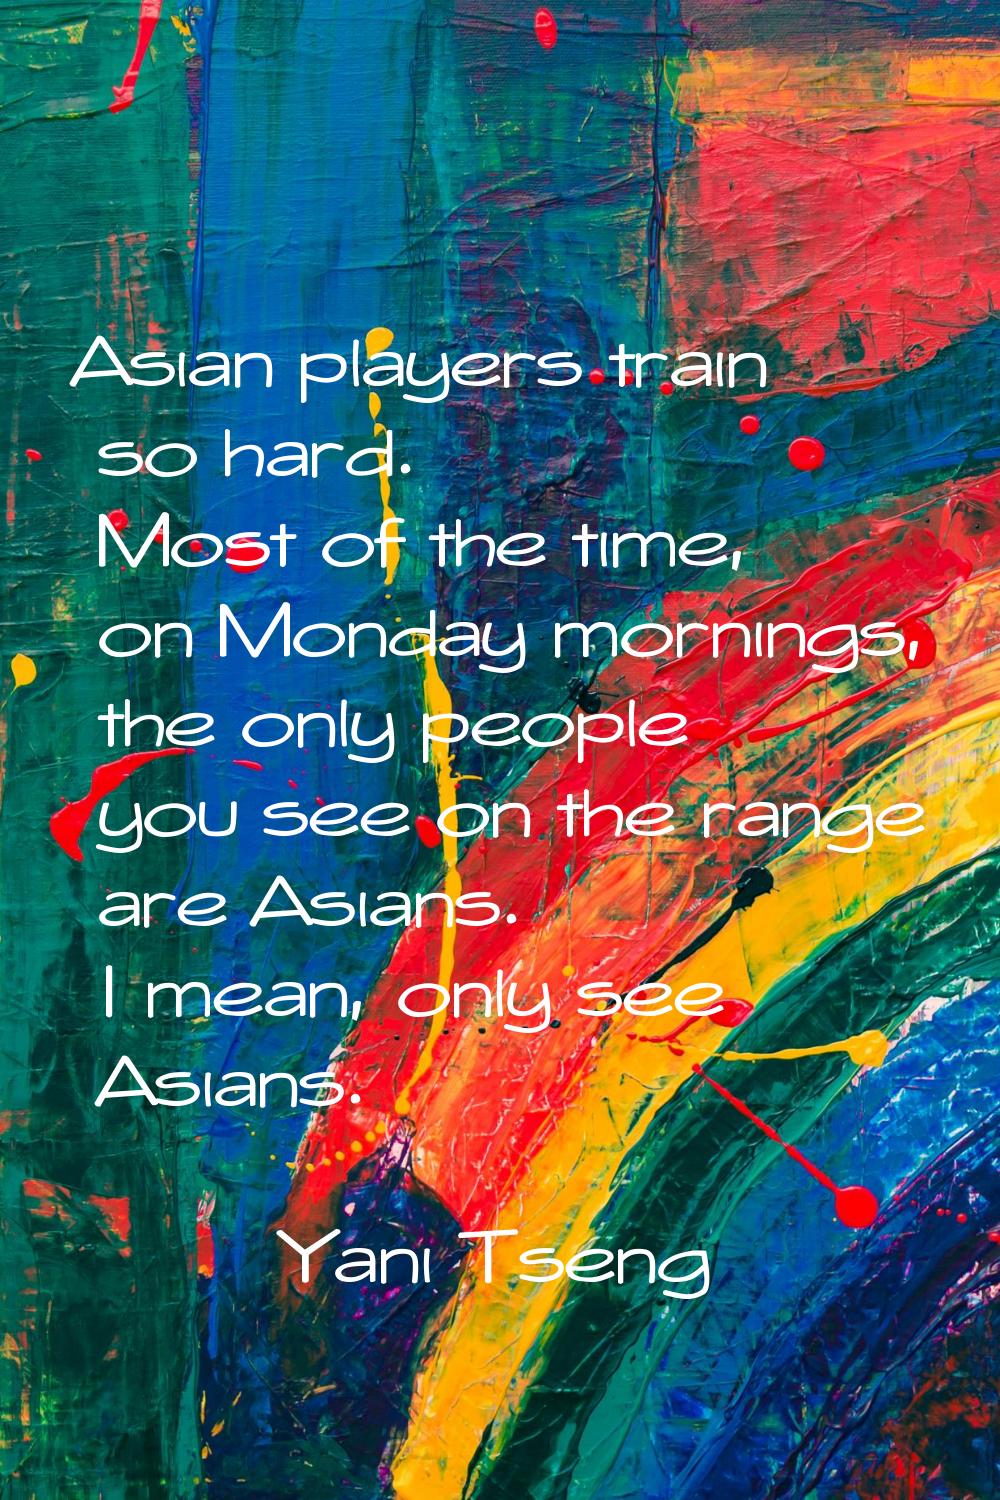 Asian players train so hard. Most of the time, on Monday mornings, the only people you see on the r